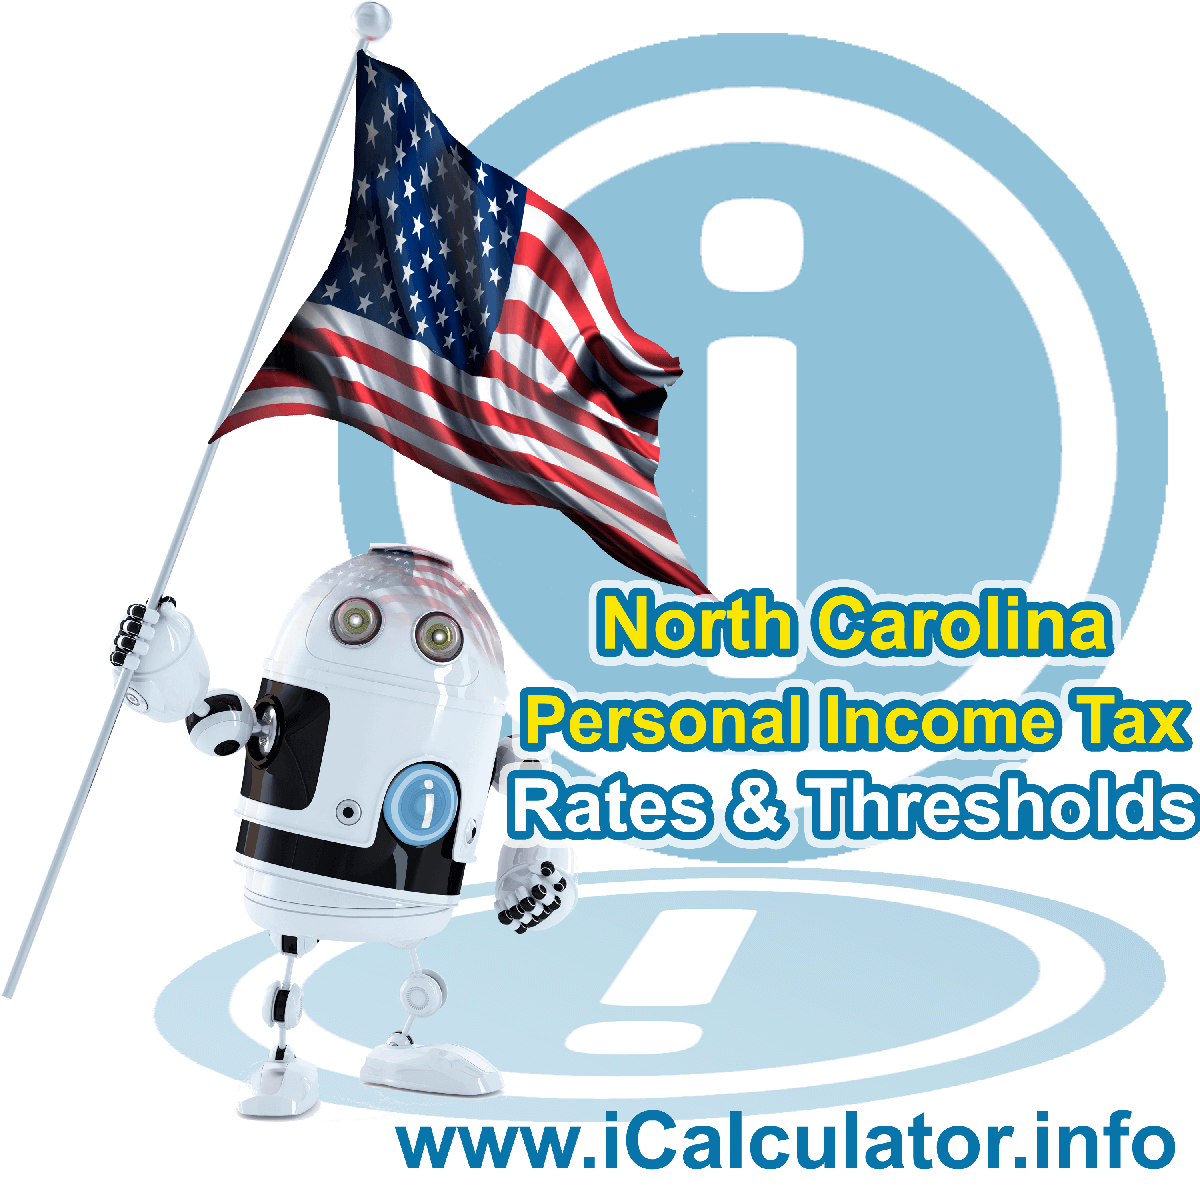 North Carolina State Tax Tables 2018. This image displays details of the North Carolina State Tax Tables for the 2018 tax return year which is provided in support of the 2018 US Tax Calculator